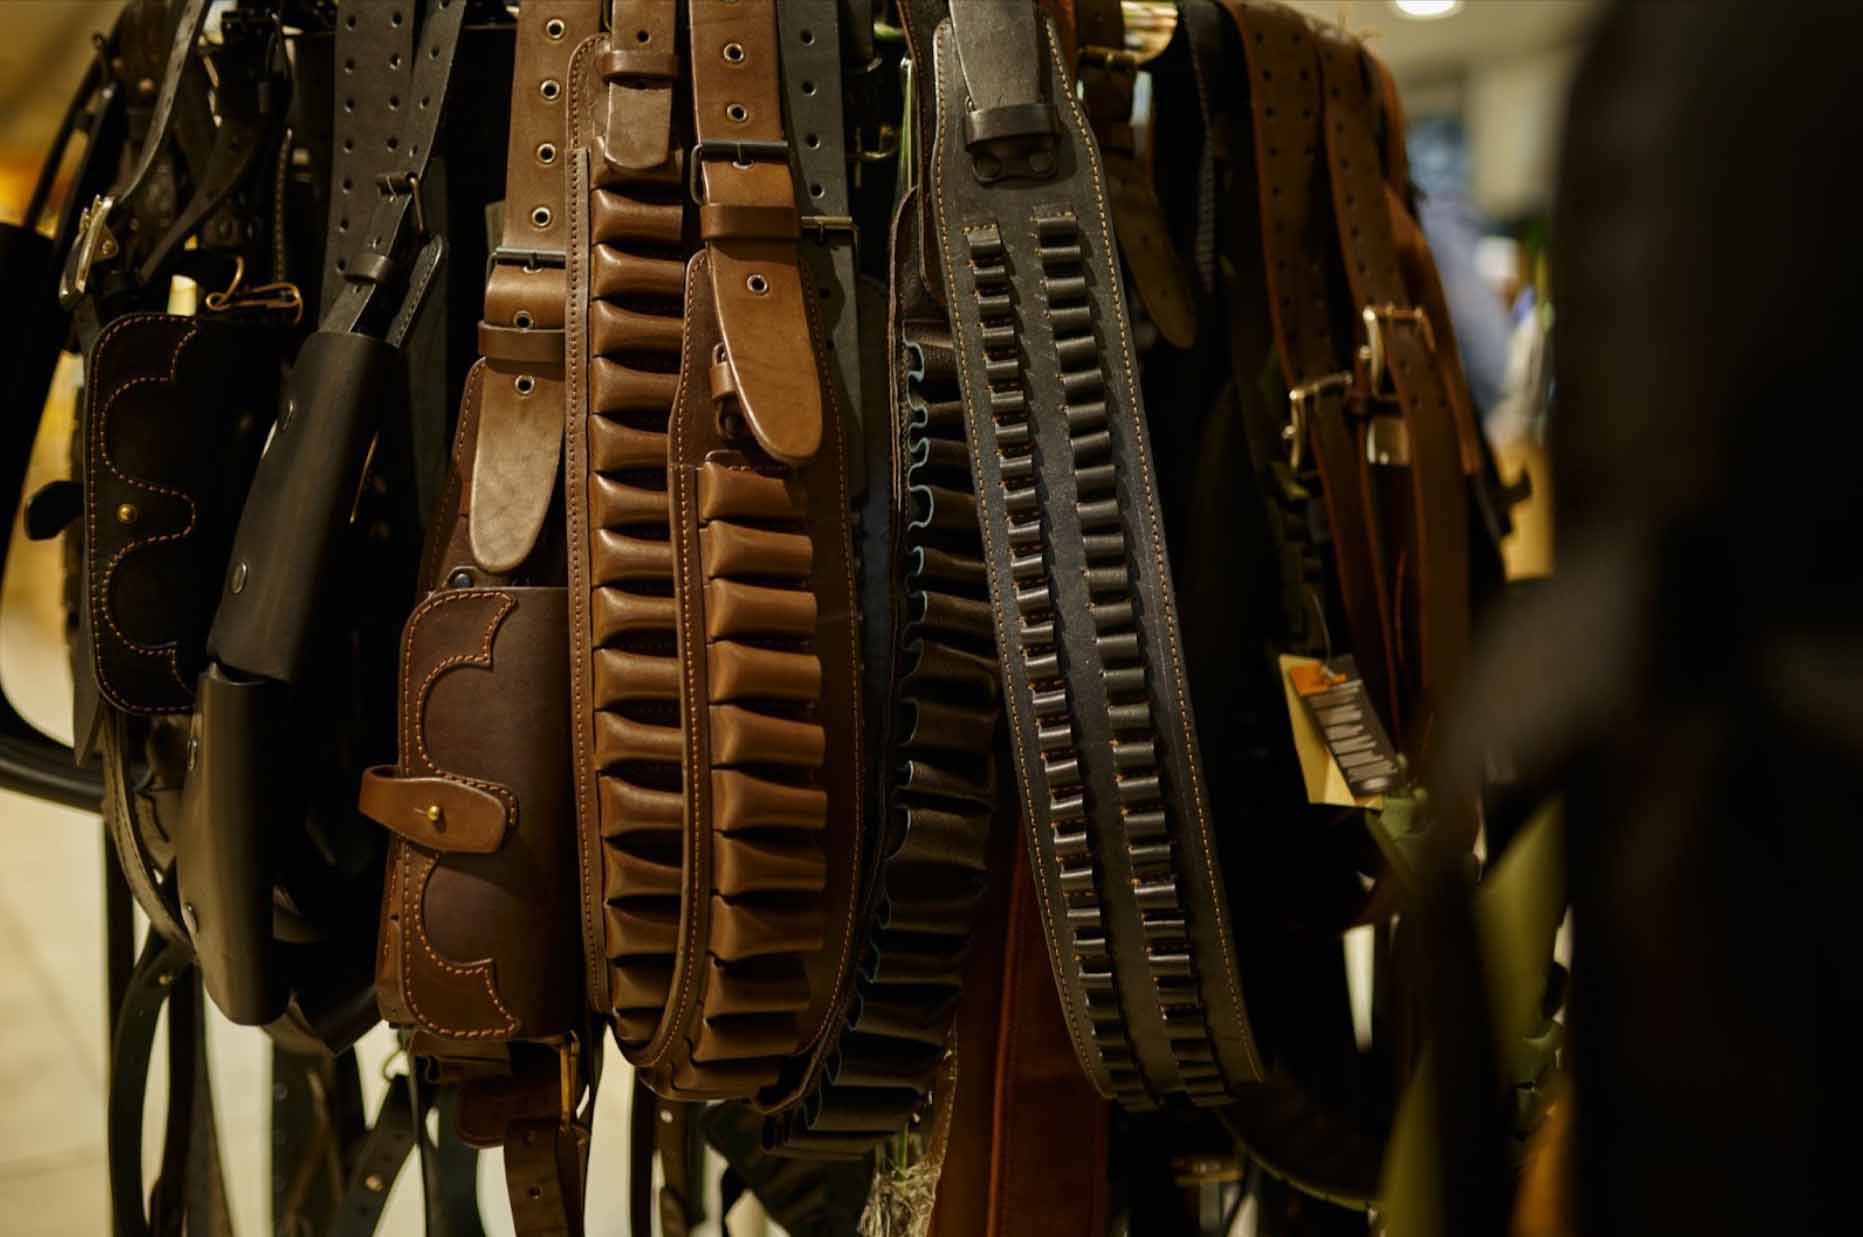 A close-up of various leather bandoliers displayed in a gun store.